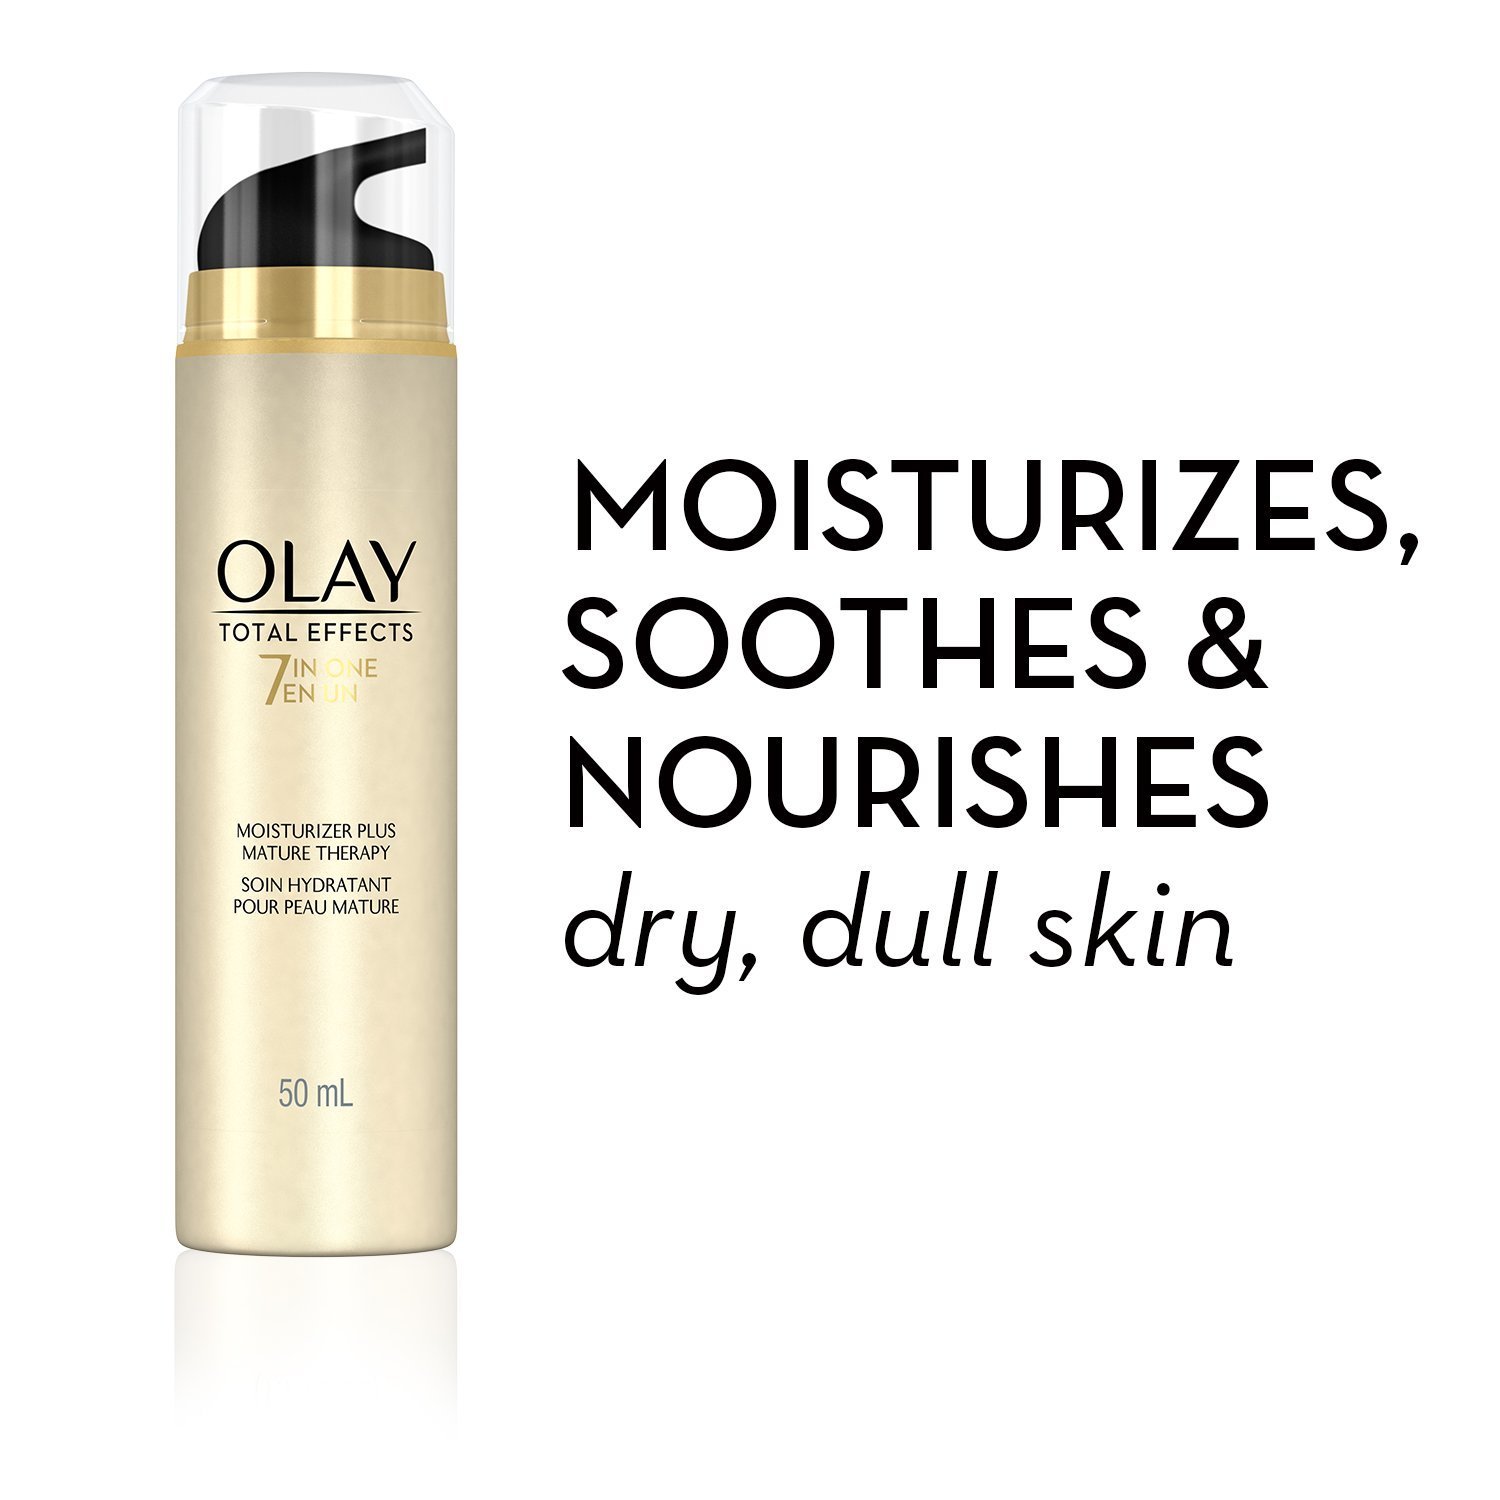 Olay Total Effects 7-In-1 Moisturizer Plus, Mature Therapy, 1.70 Fl. Oz. - image 2 of 7